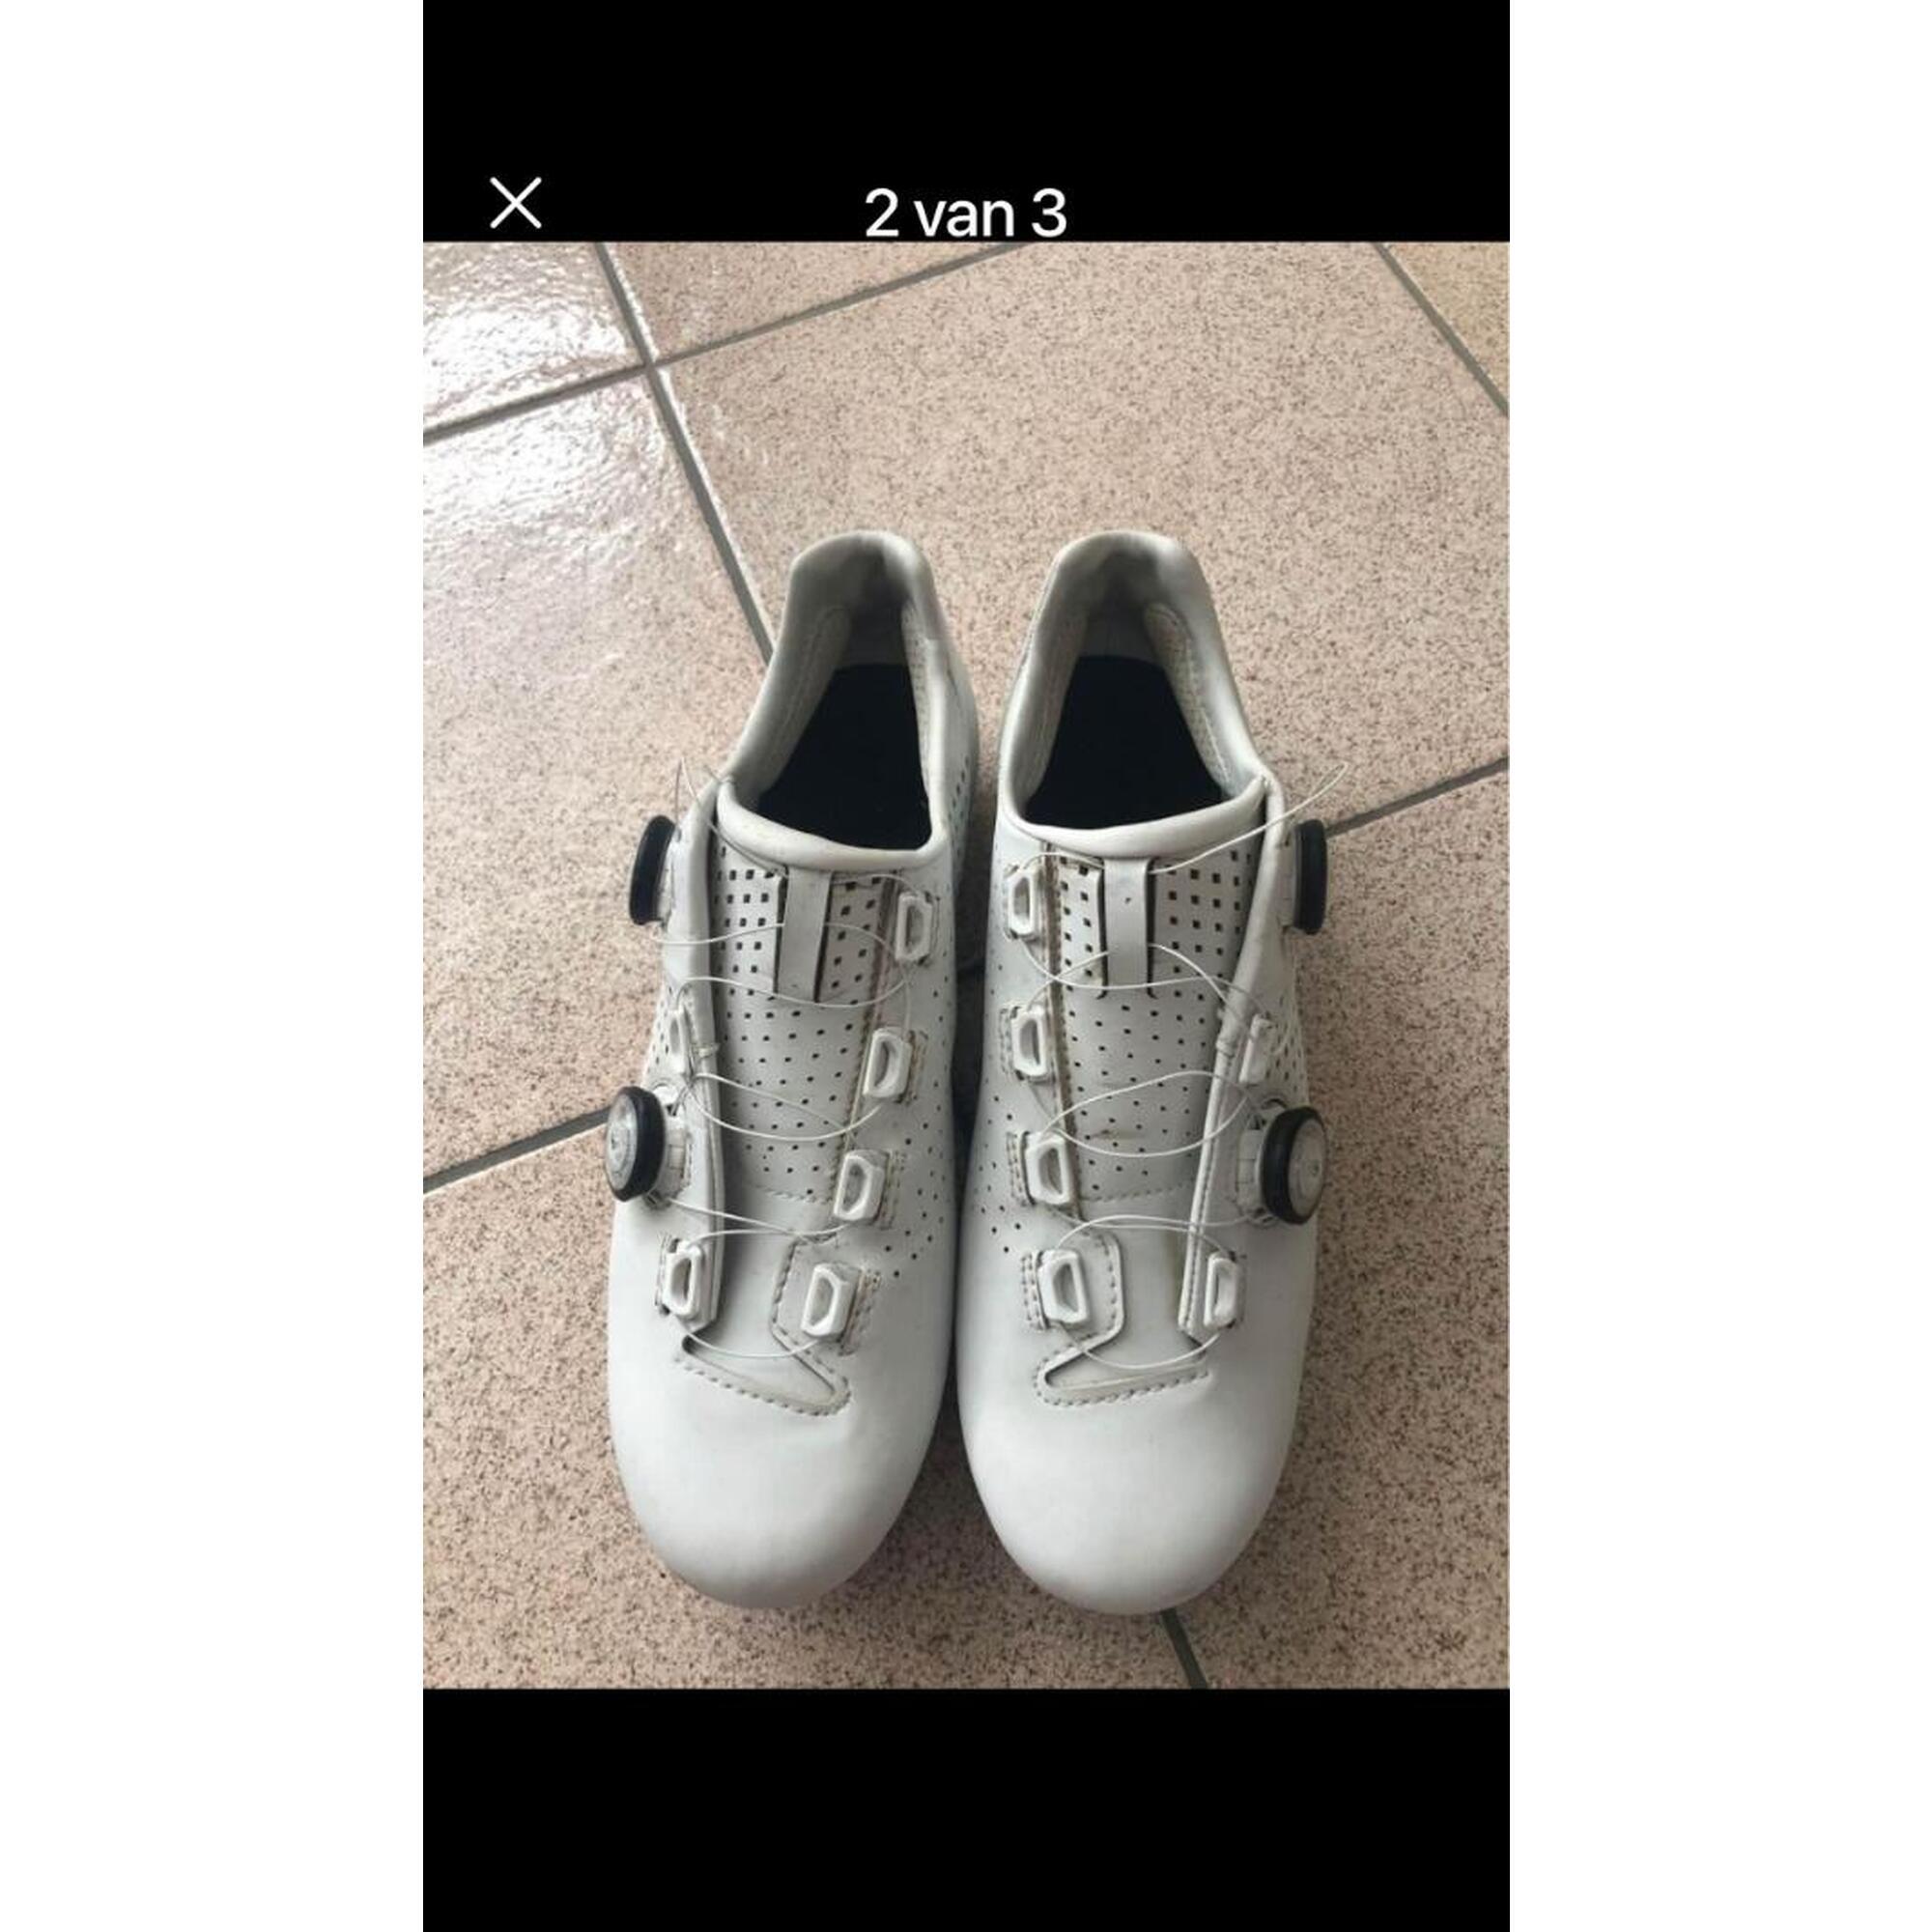 C2C - Chaussures de cyclisme blanches From Rysel